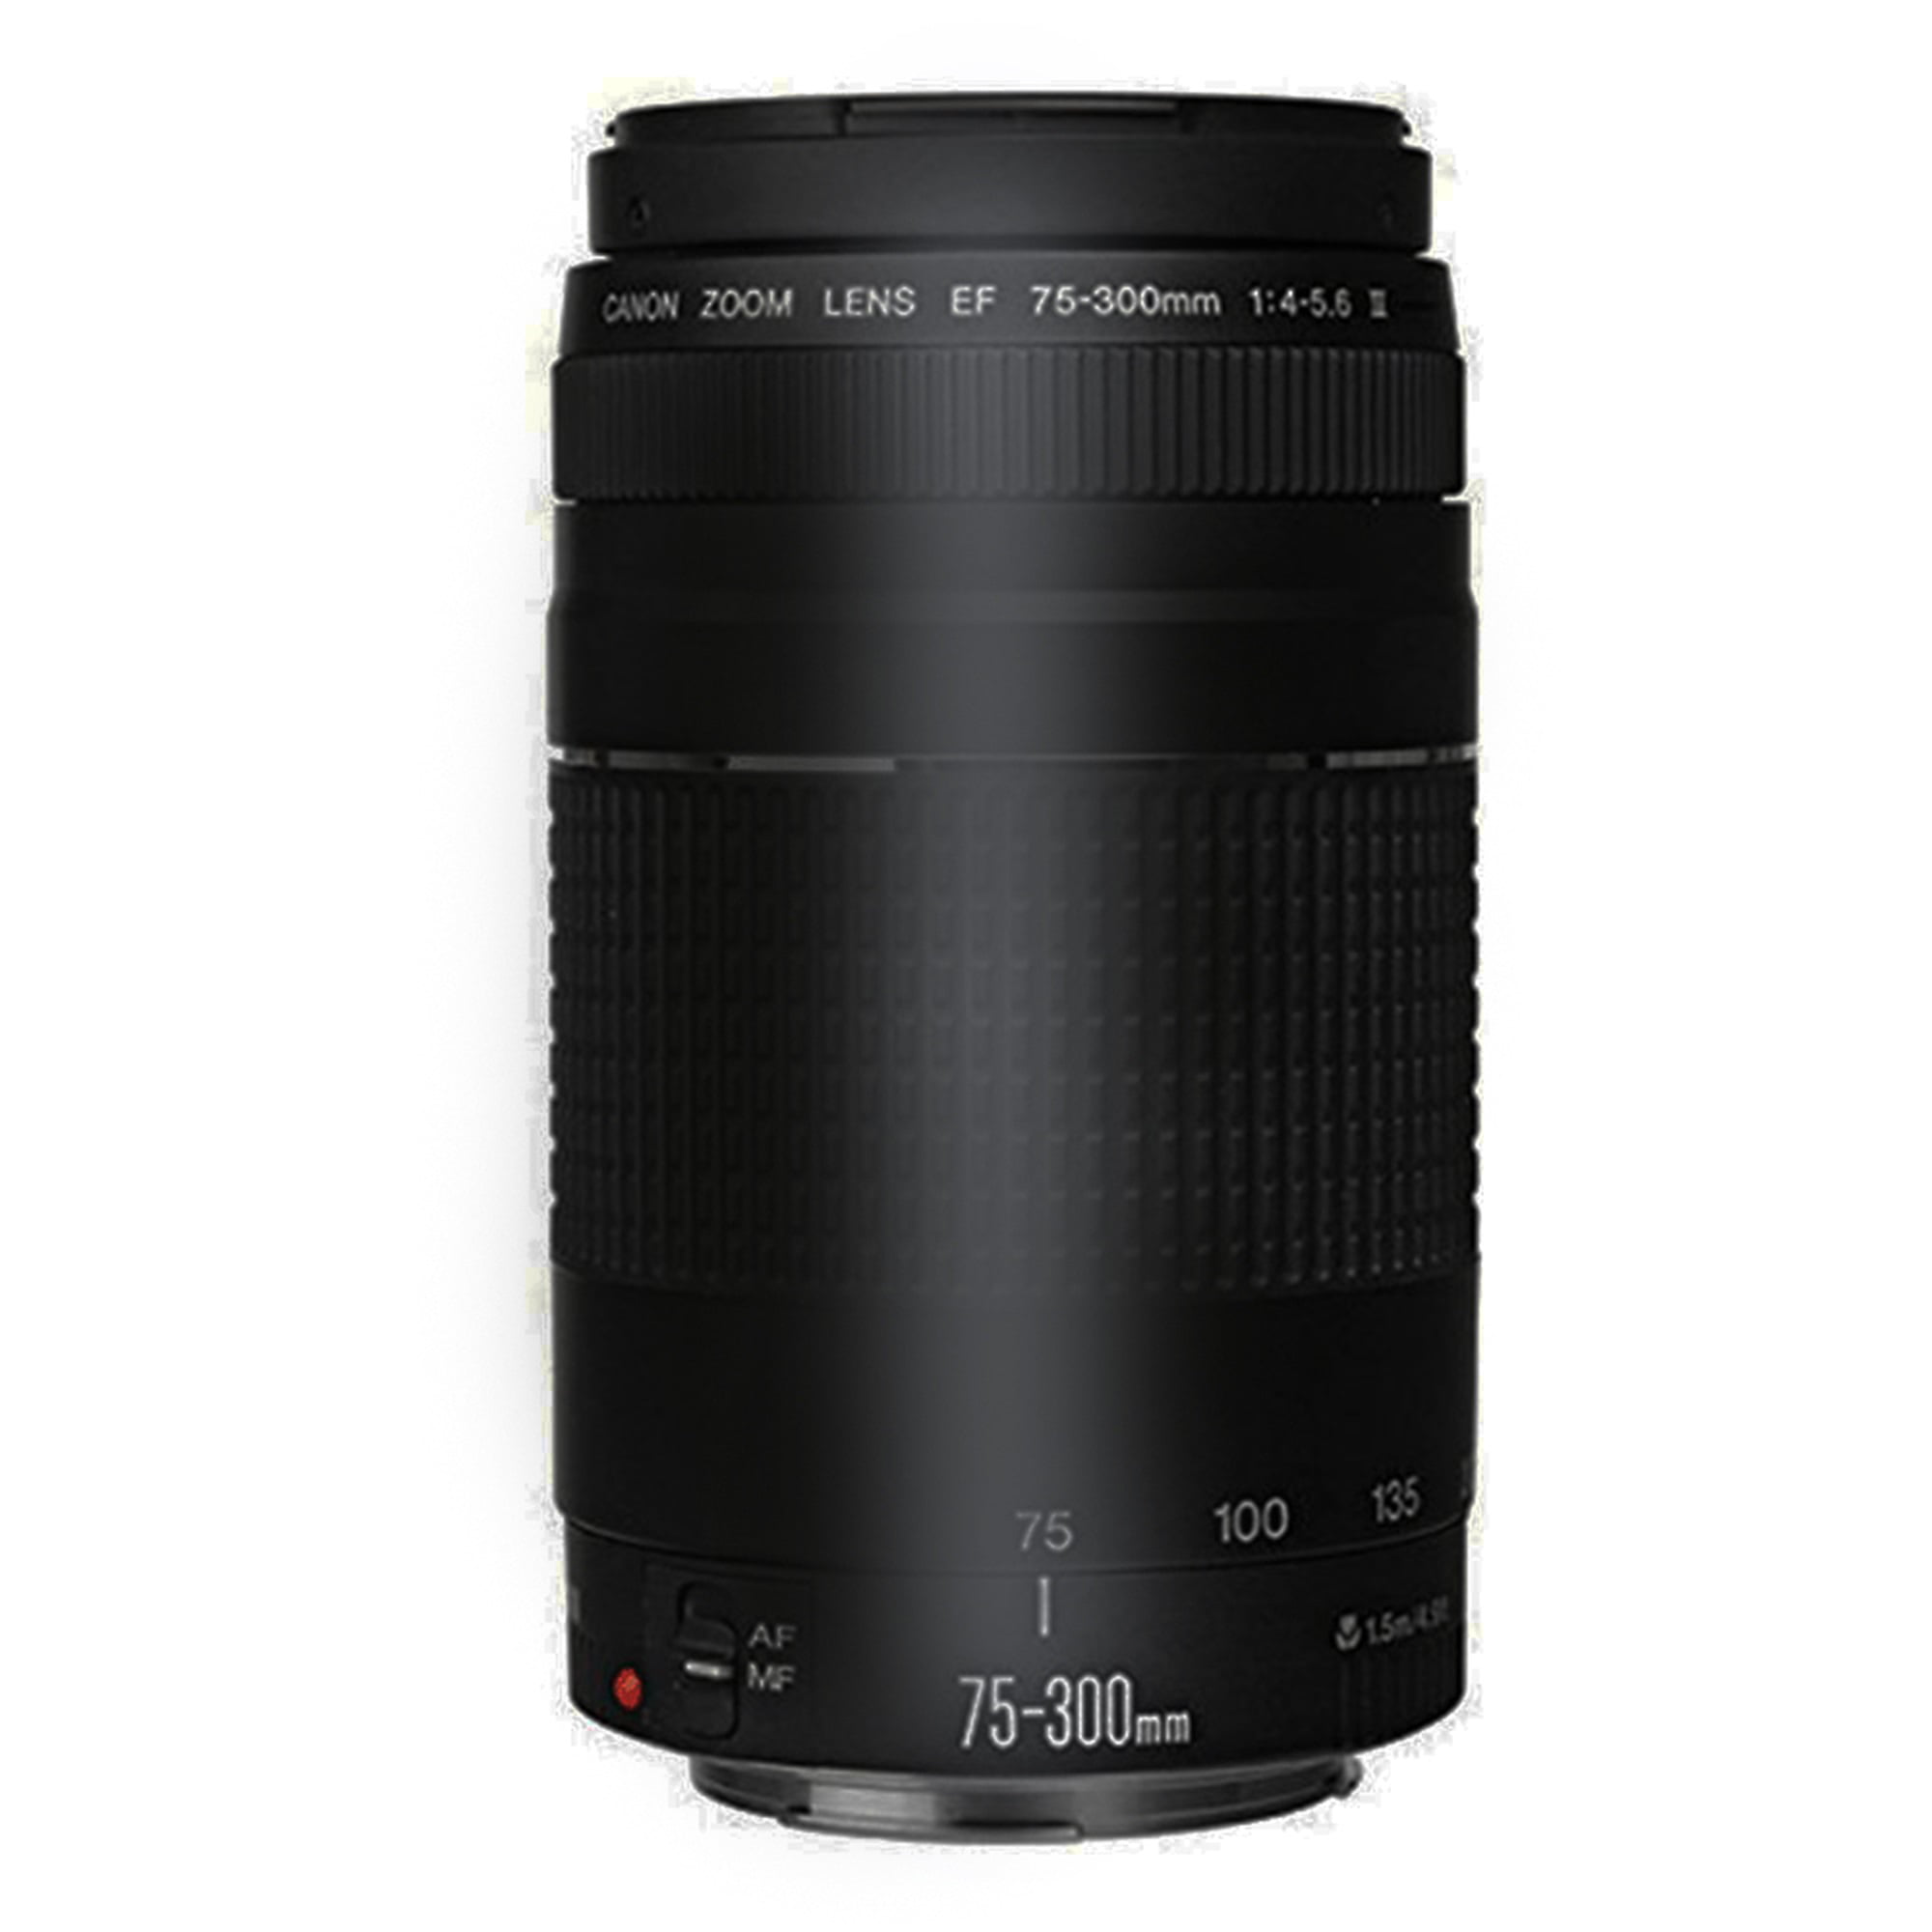 Canon EF 75-300mm f/4.0-5.6 III Lens with EF-M Adapter for Canon